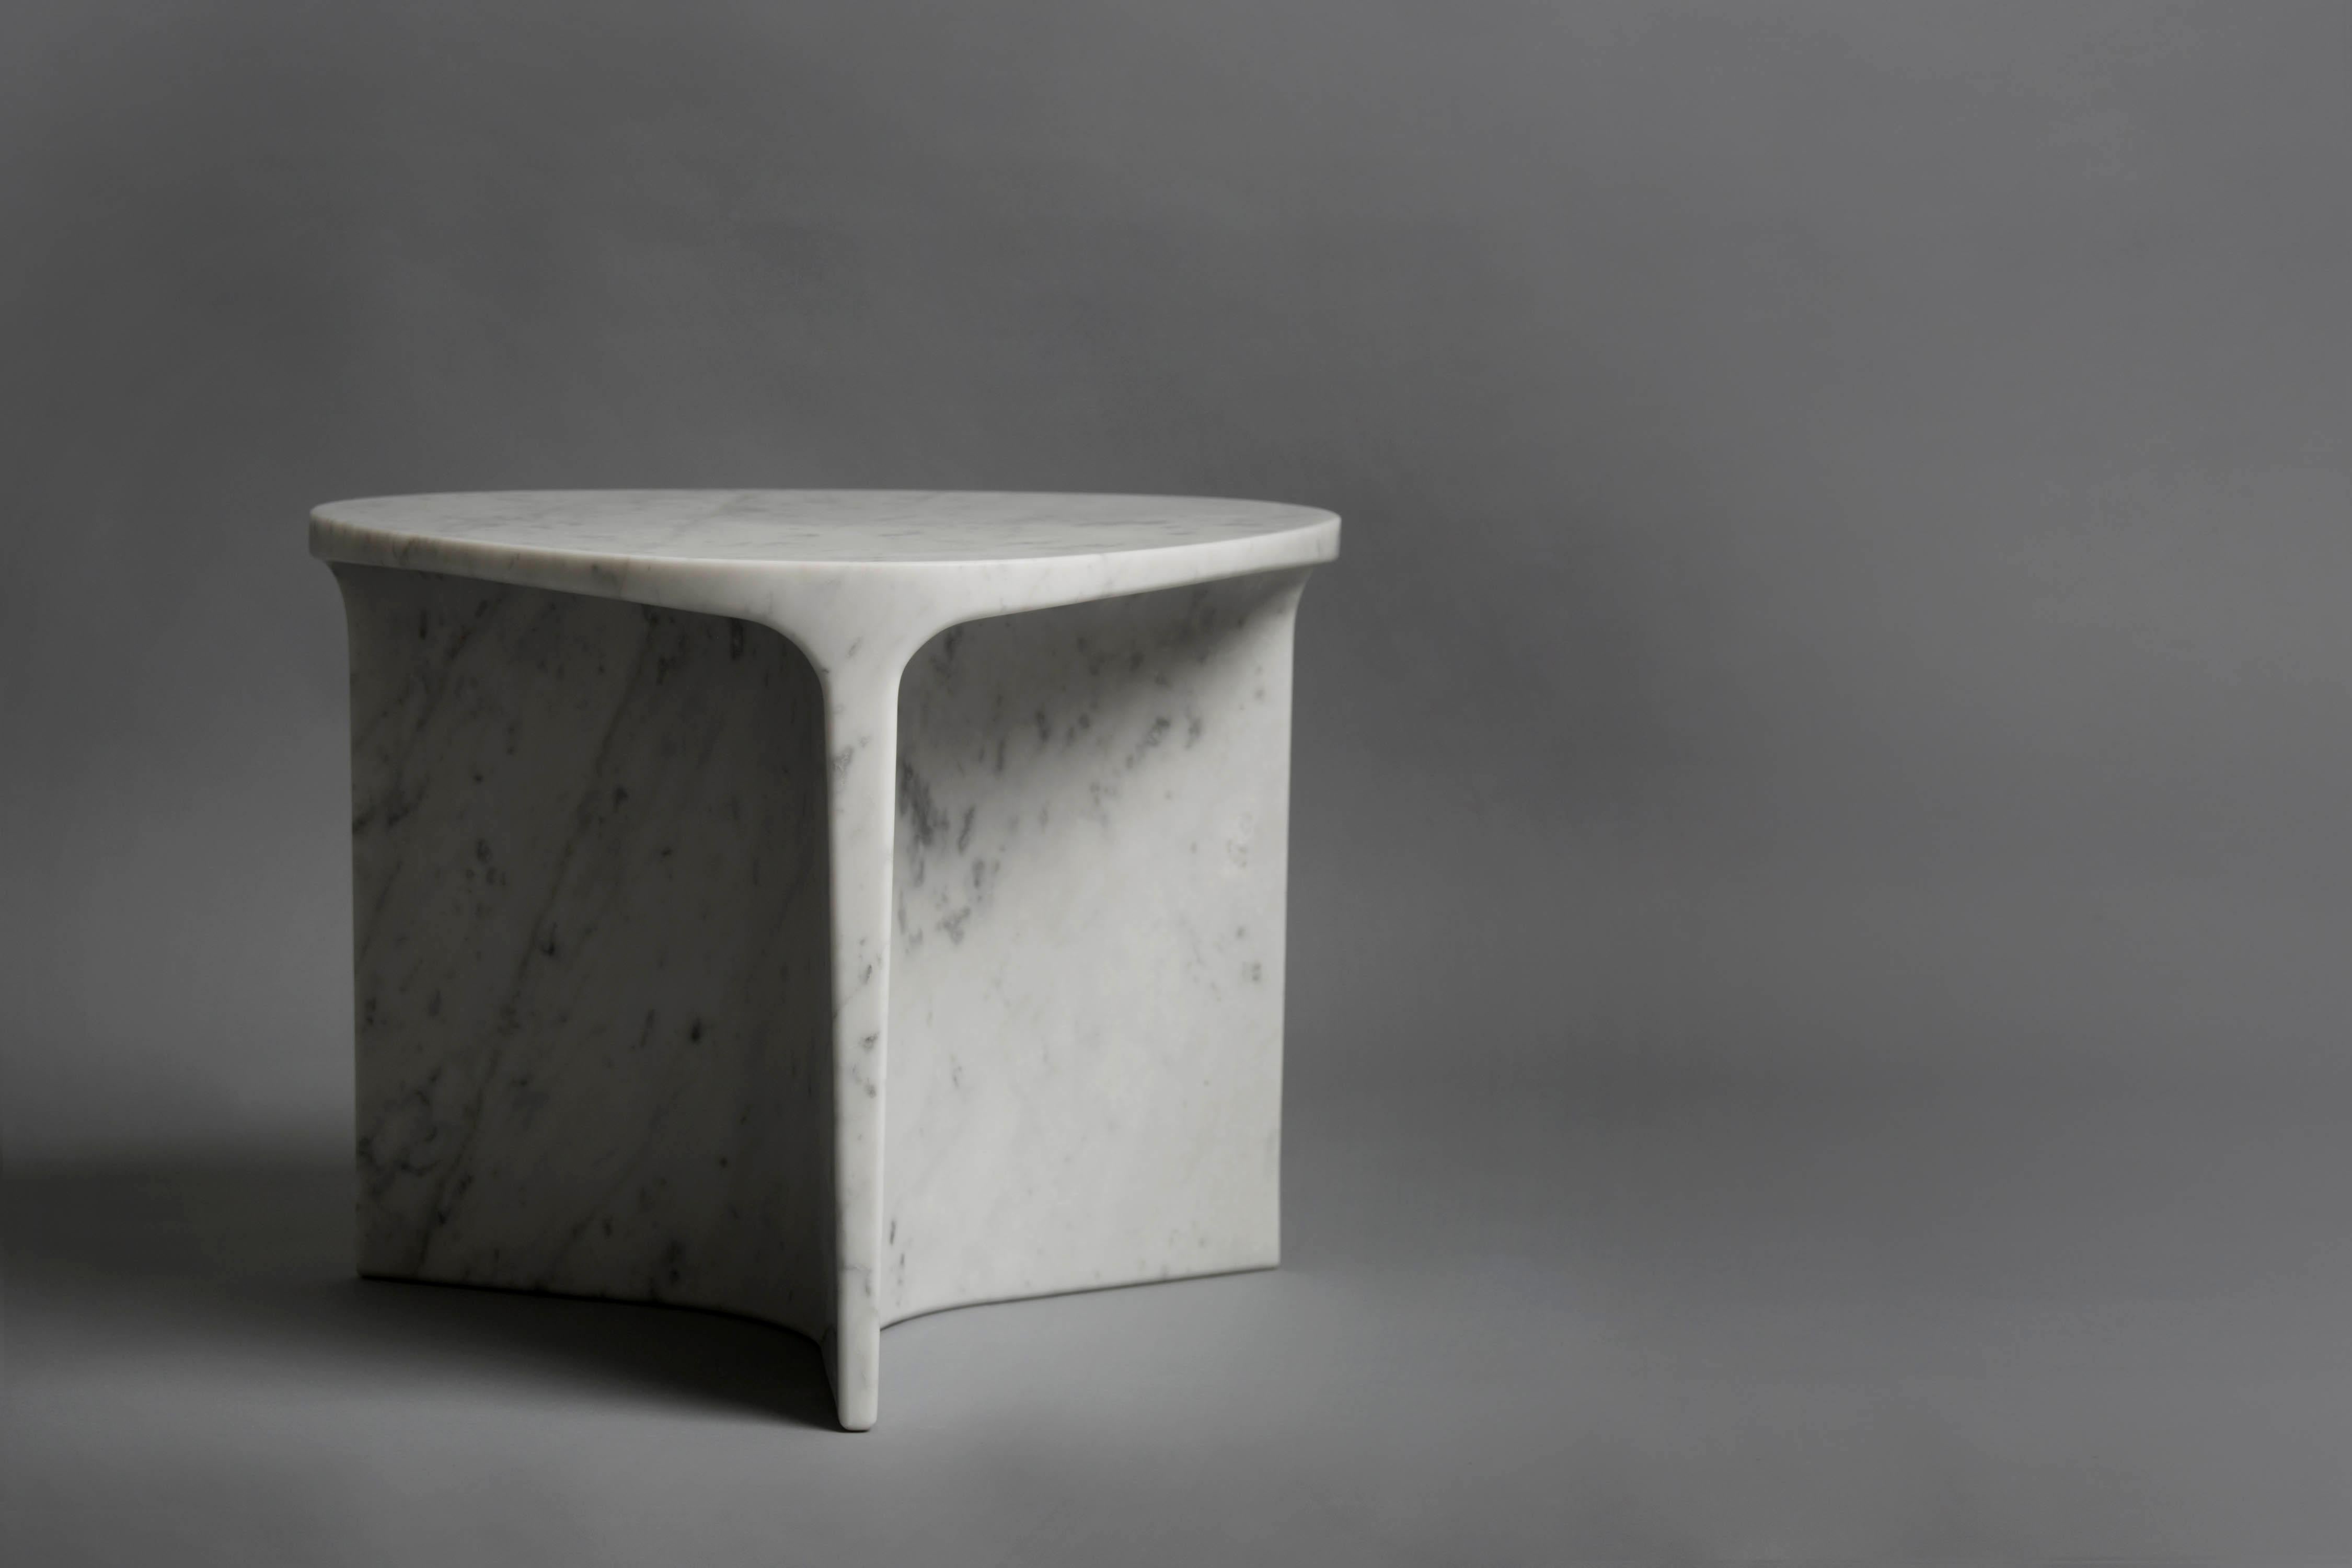 Carv occasional table is Cut from a single block of Italian Carrara marble.
Essential and organic design, naturally creating a flat tabletop flowing
to a Y - shaped foot, revealing the stone’s veins
from the exterior surface through to it’s